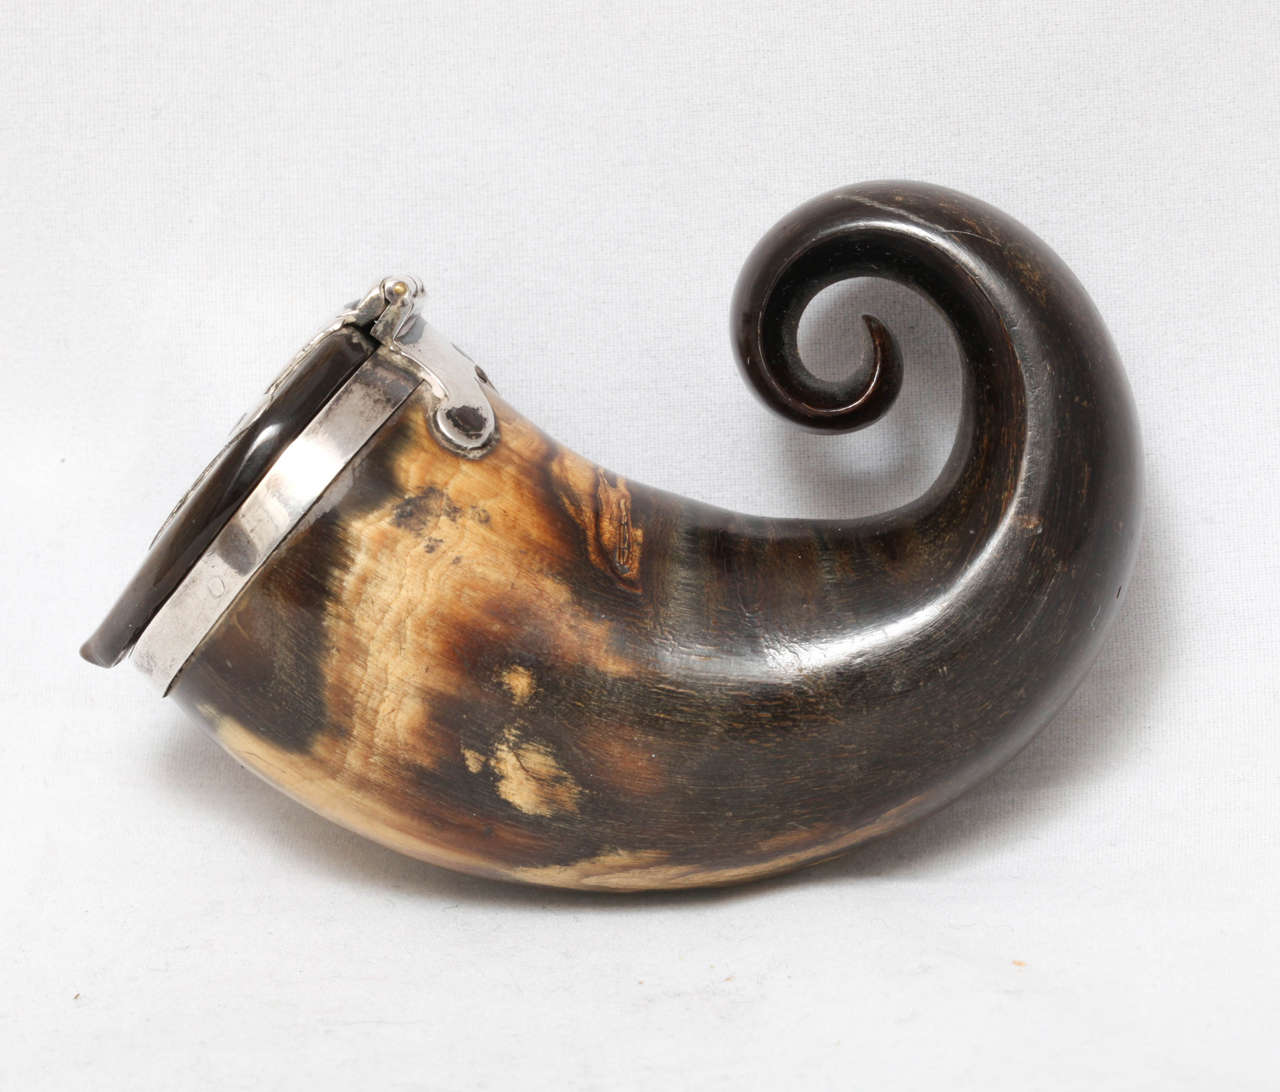 Georgian, sterling silver-mounted (unmarked, but tested) ram's horn snuff mull with hinged lid, Scotland, circa 1800. Measures: 8